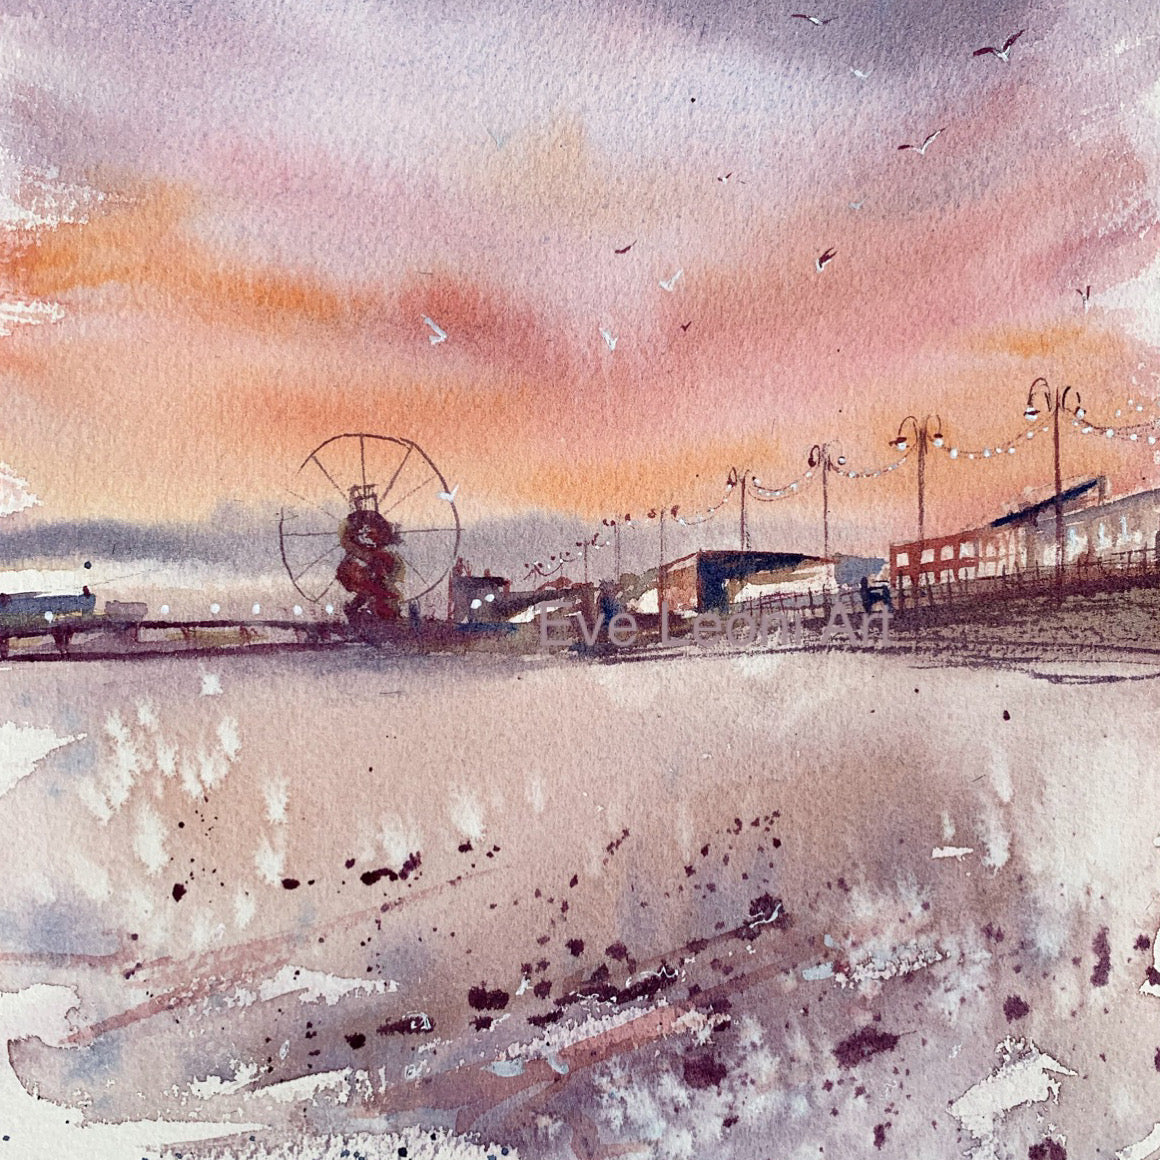 An original watercolour painting of the North promenade in Cleethorpes, featuring the pier in the distance, painted by Eve Leoni Smith.